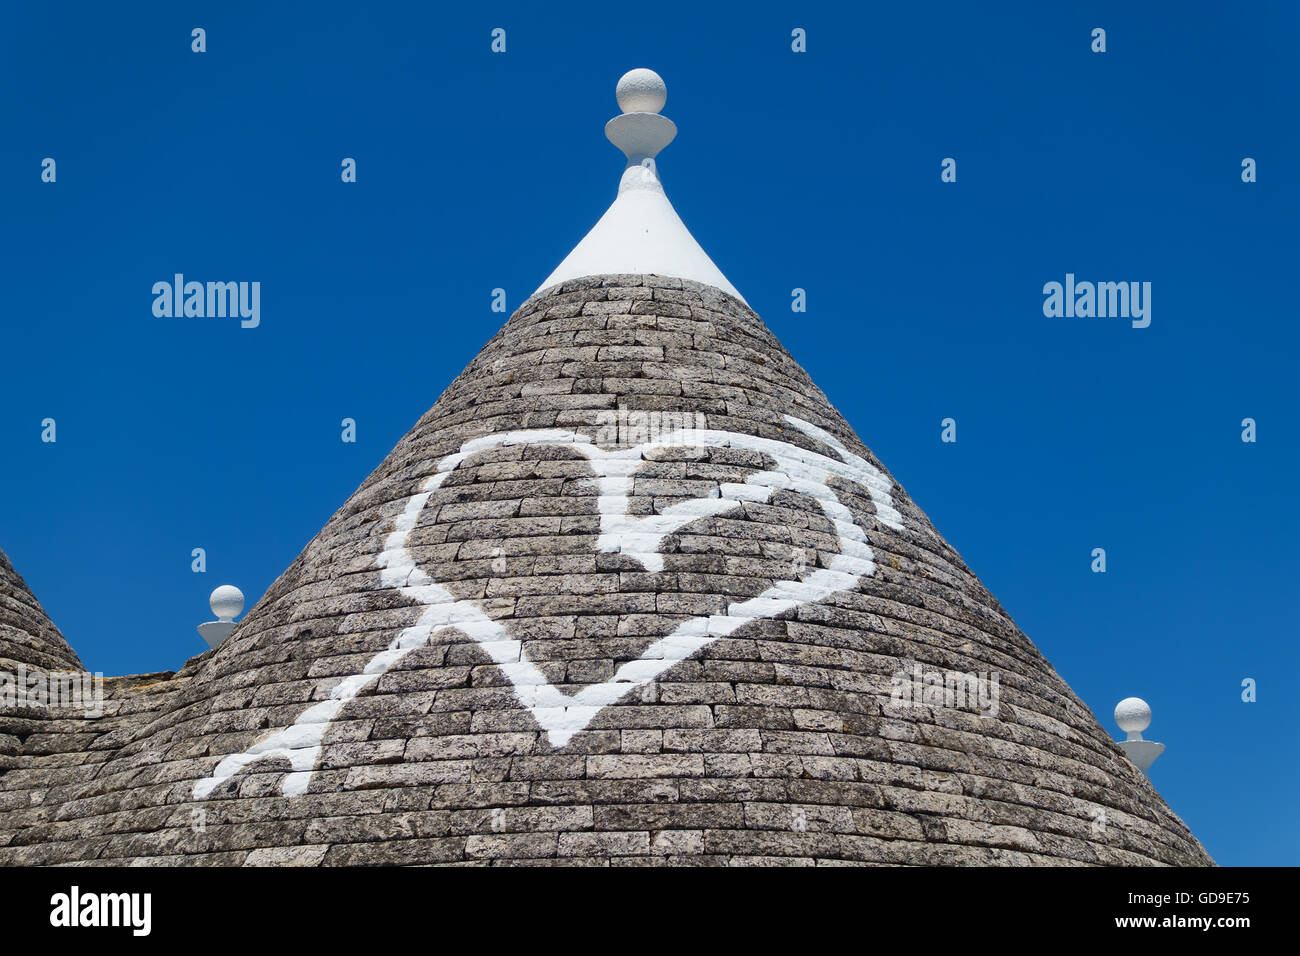 Detail of a stone trulli house roof with a heart painted on it in white paint in the town of Alberobello, Puglia, Italy. Stock Photo